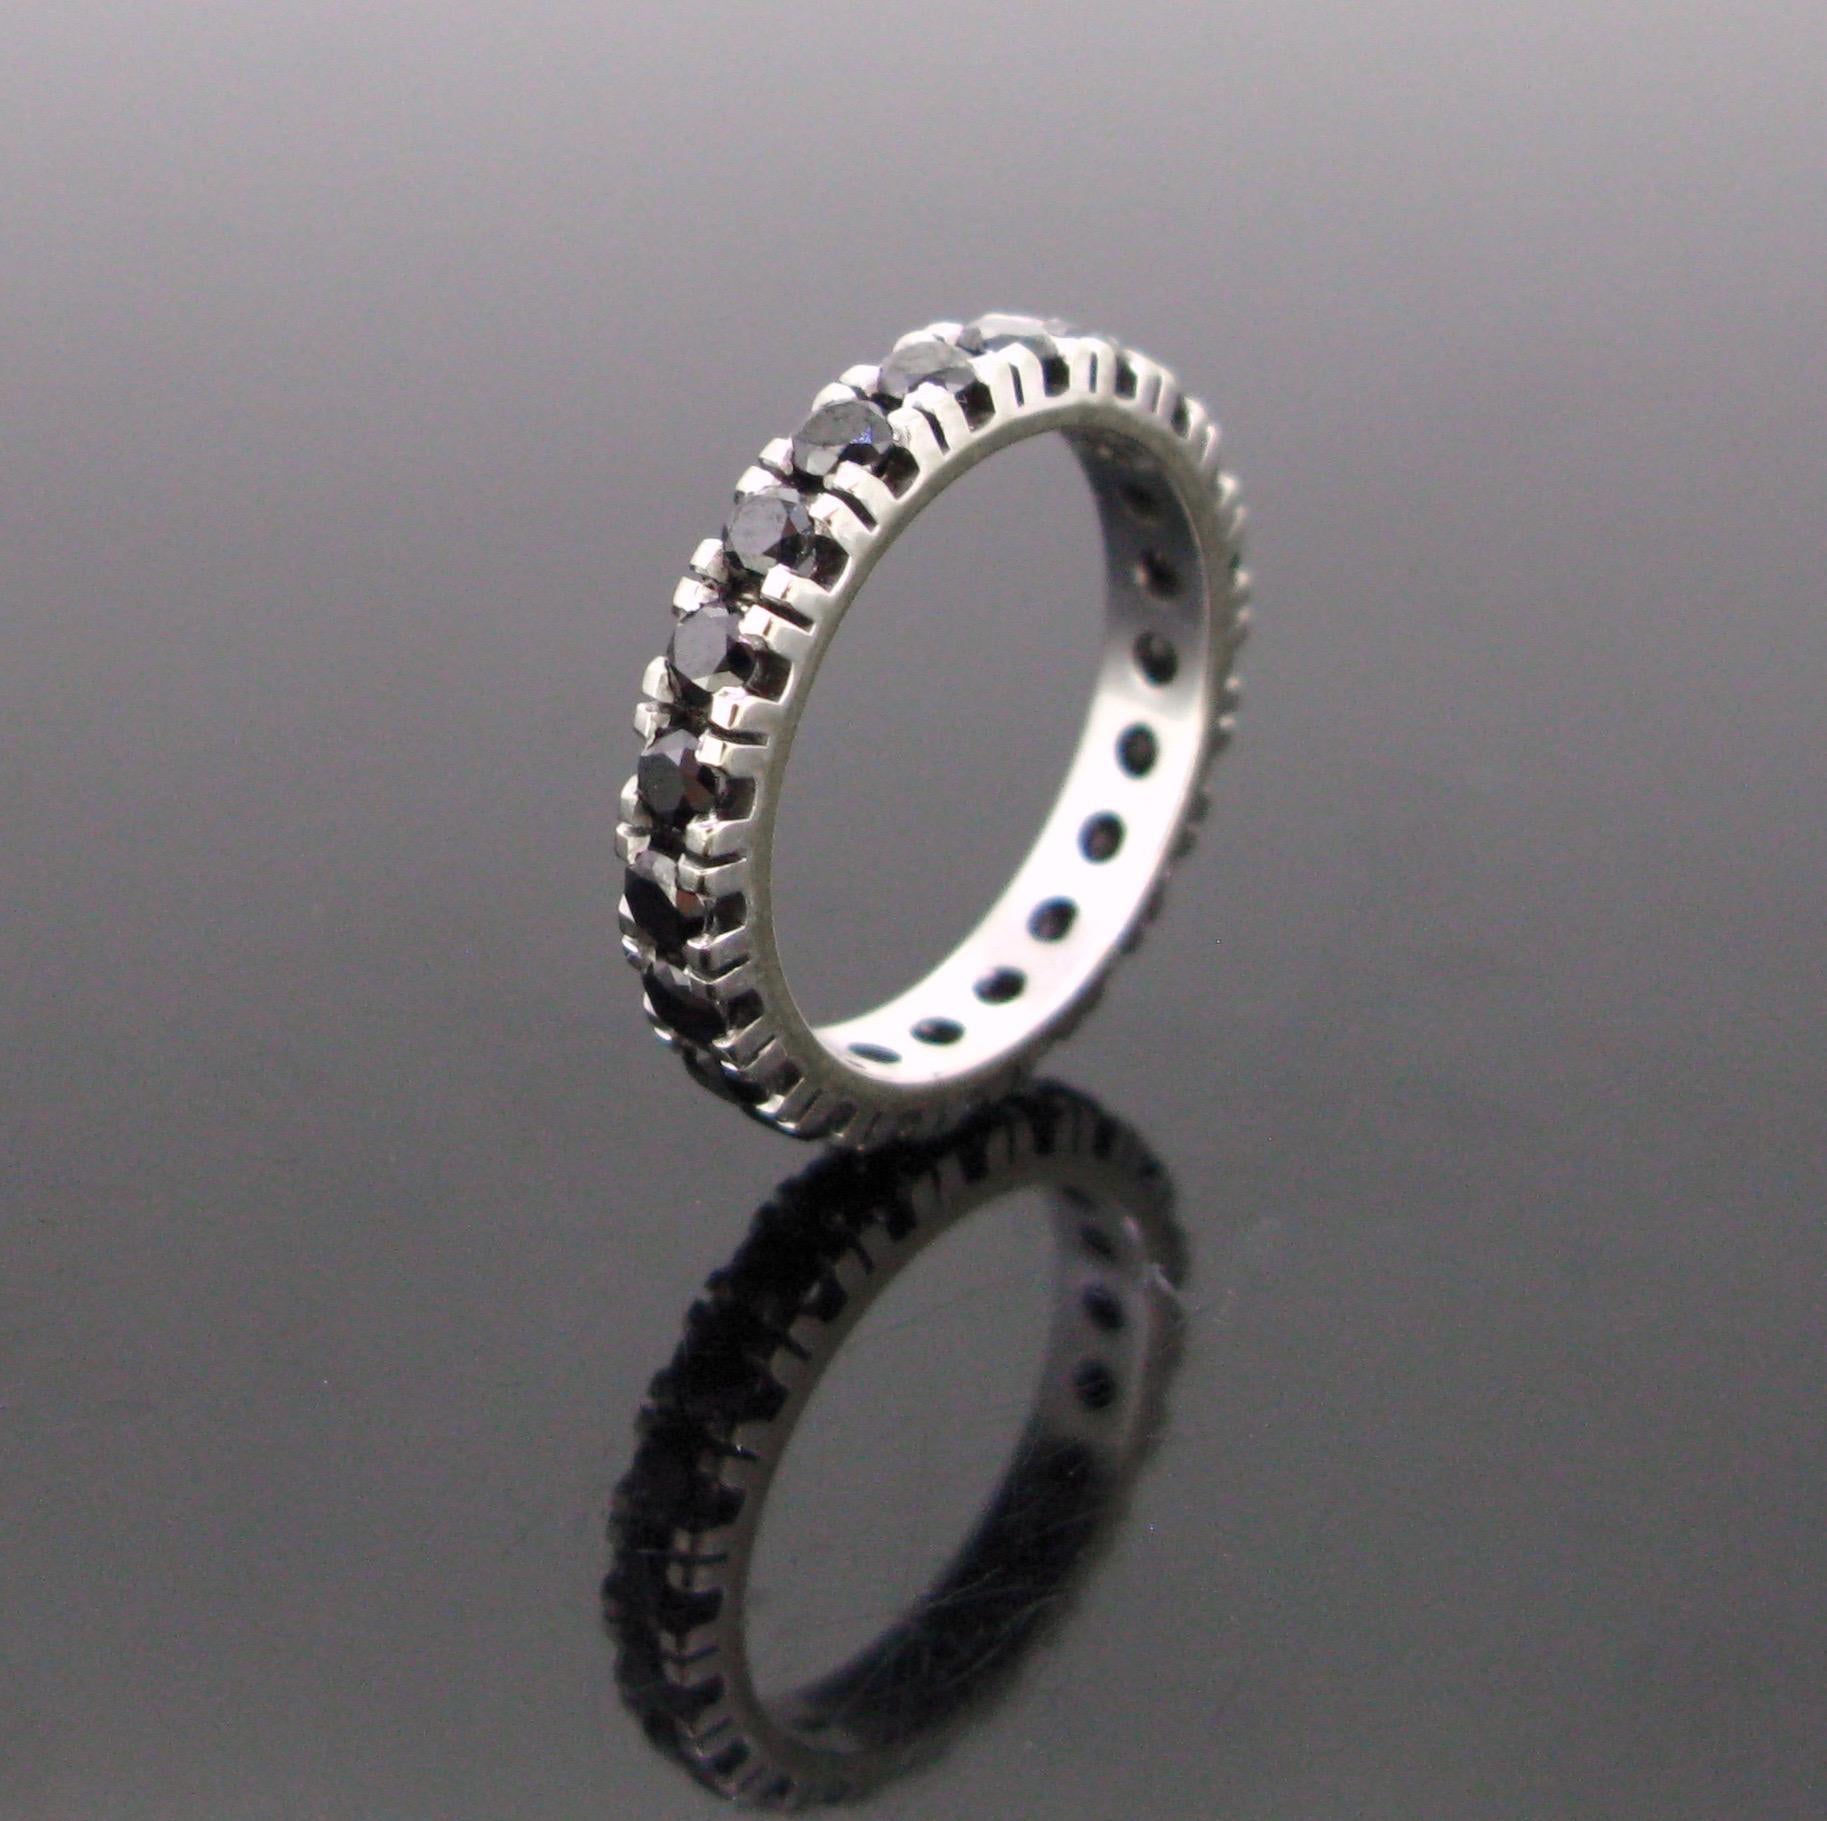 Weight:	4.69gr


Metal:		18kt White Gold


Stones:	21 Black Diamonds
•	Cut:	Round Cut  
•	Total Carat Weight:	1.50ct approximately


Condition:	Very Good


Comments:	This lovely eternity ring is fully made in 18kt white gold. It is set with 21 round